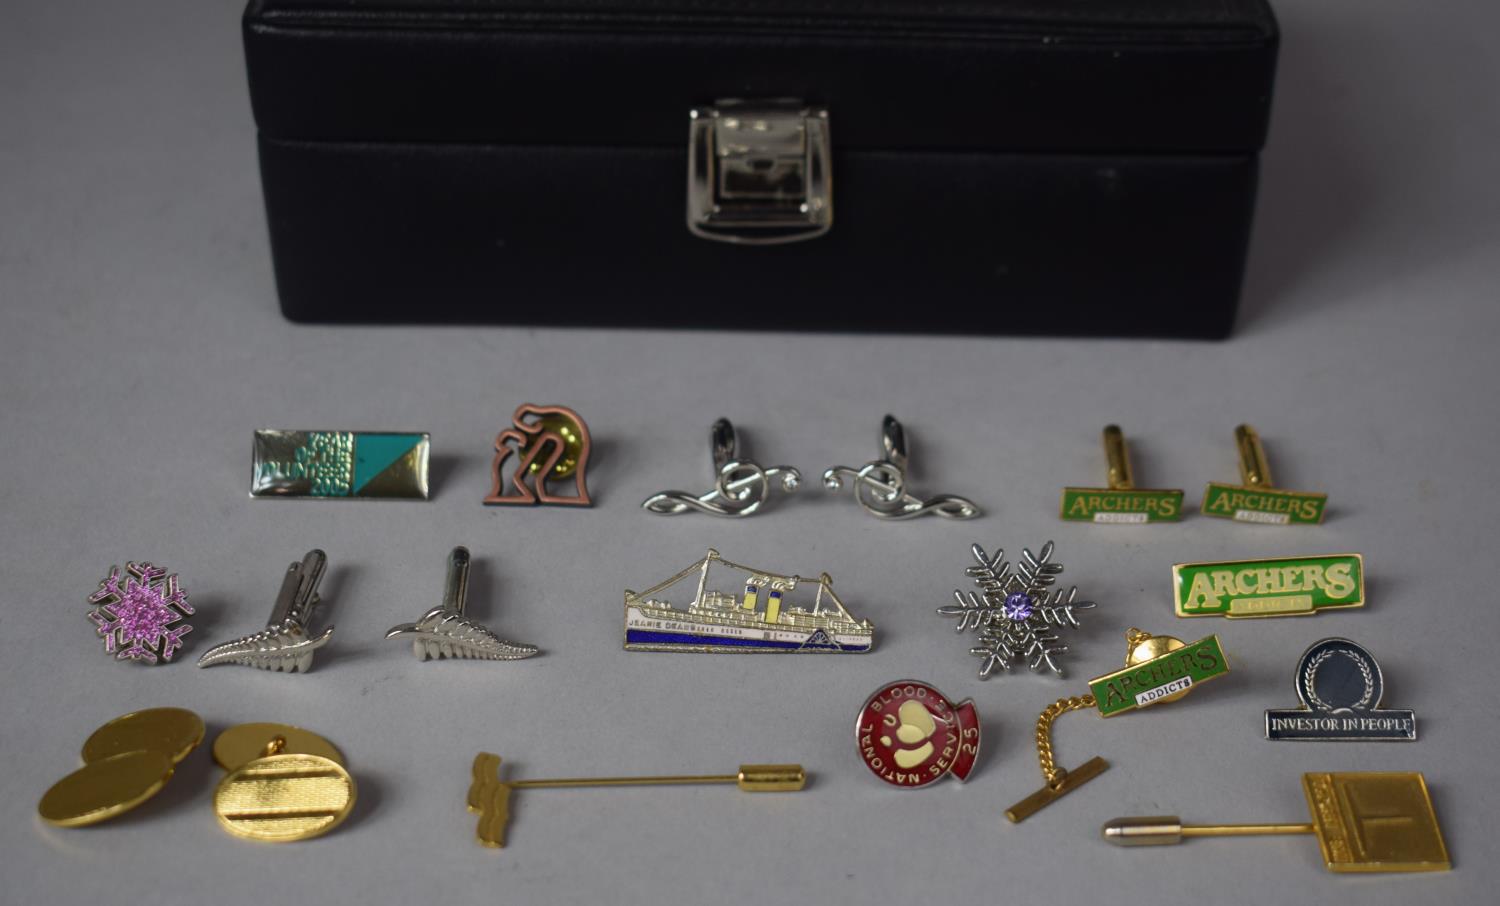 A Small Jewellery Box Containing Cufflinks, Enamelled Badges etc - Image 2 of 2